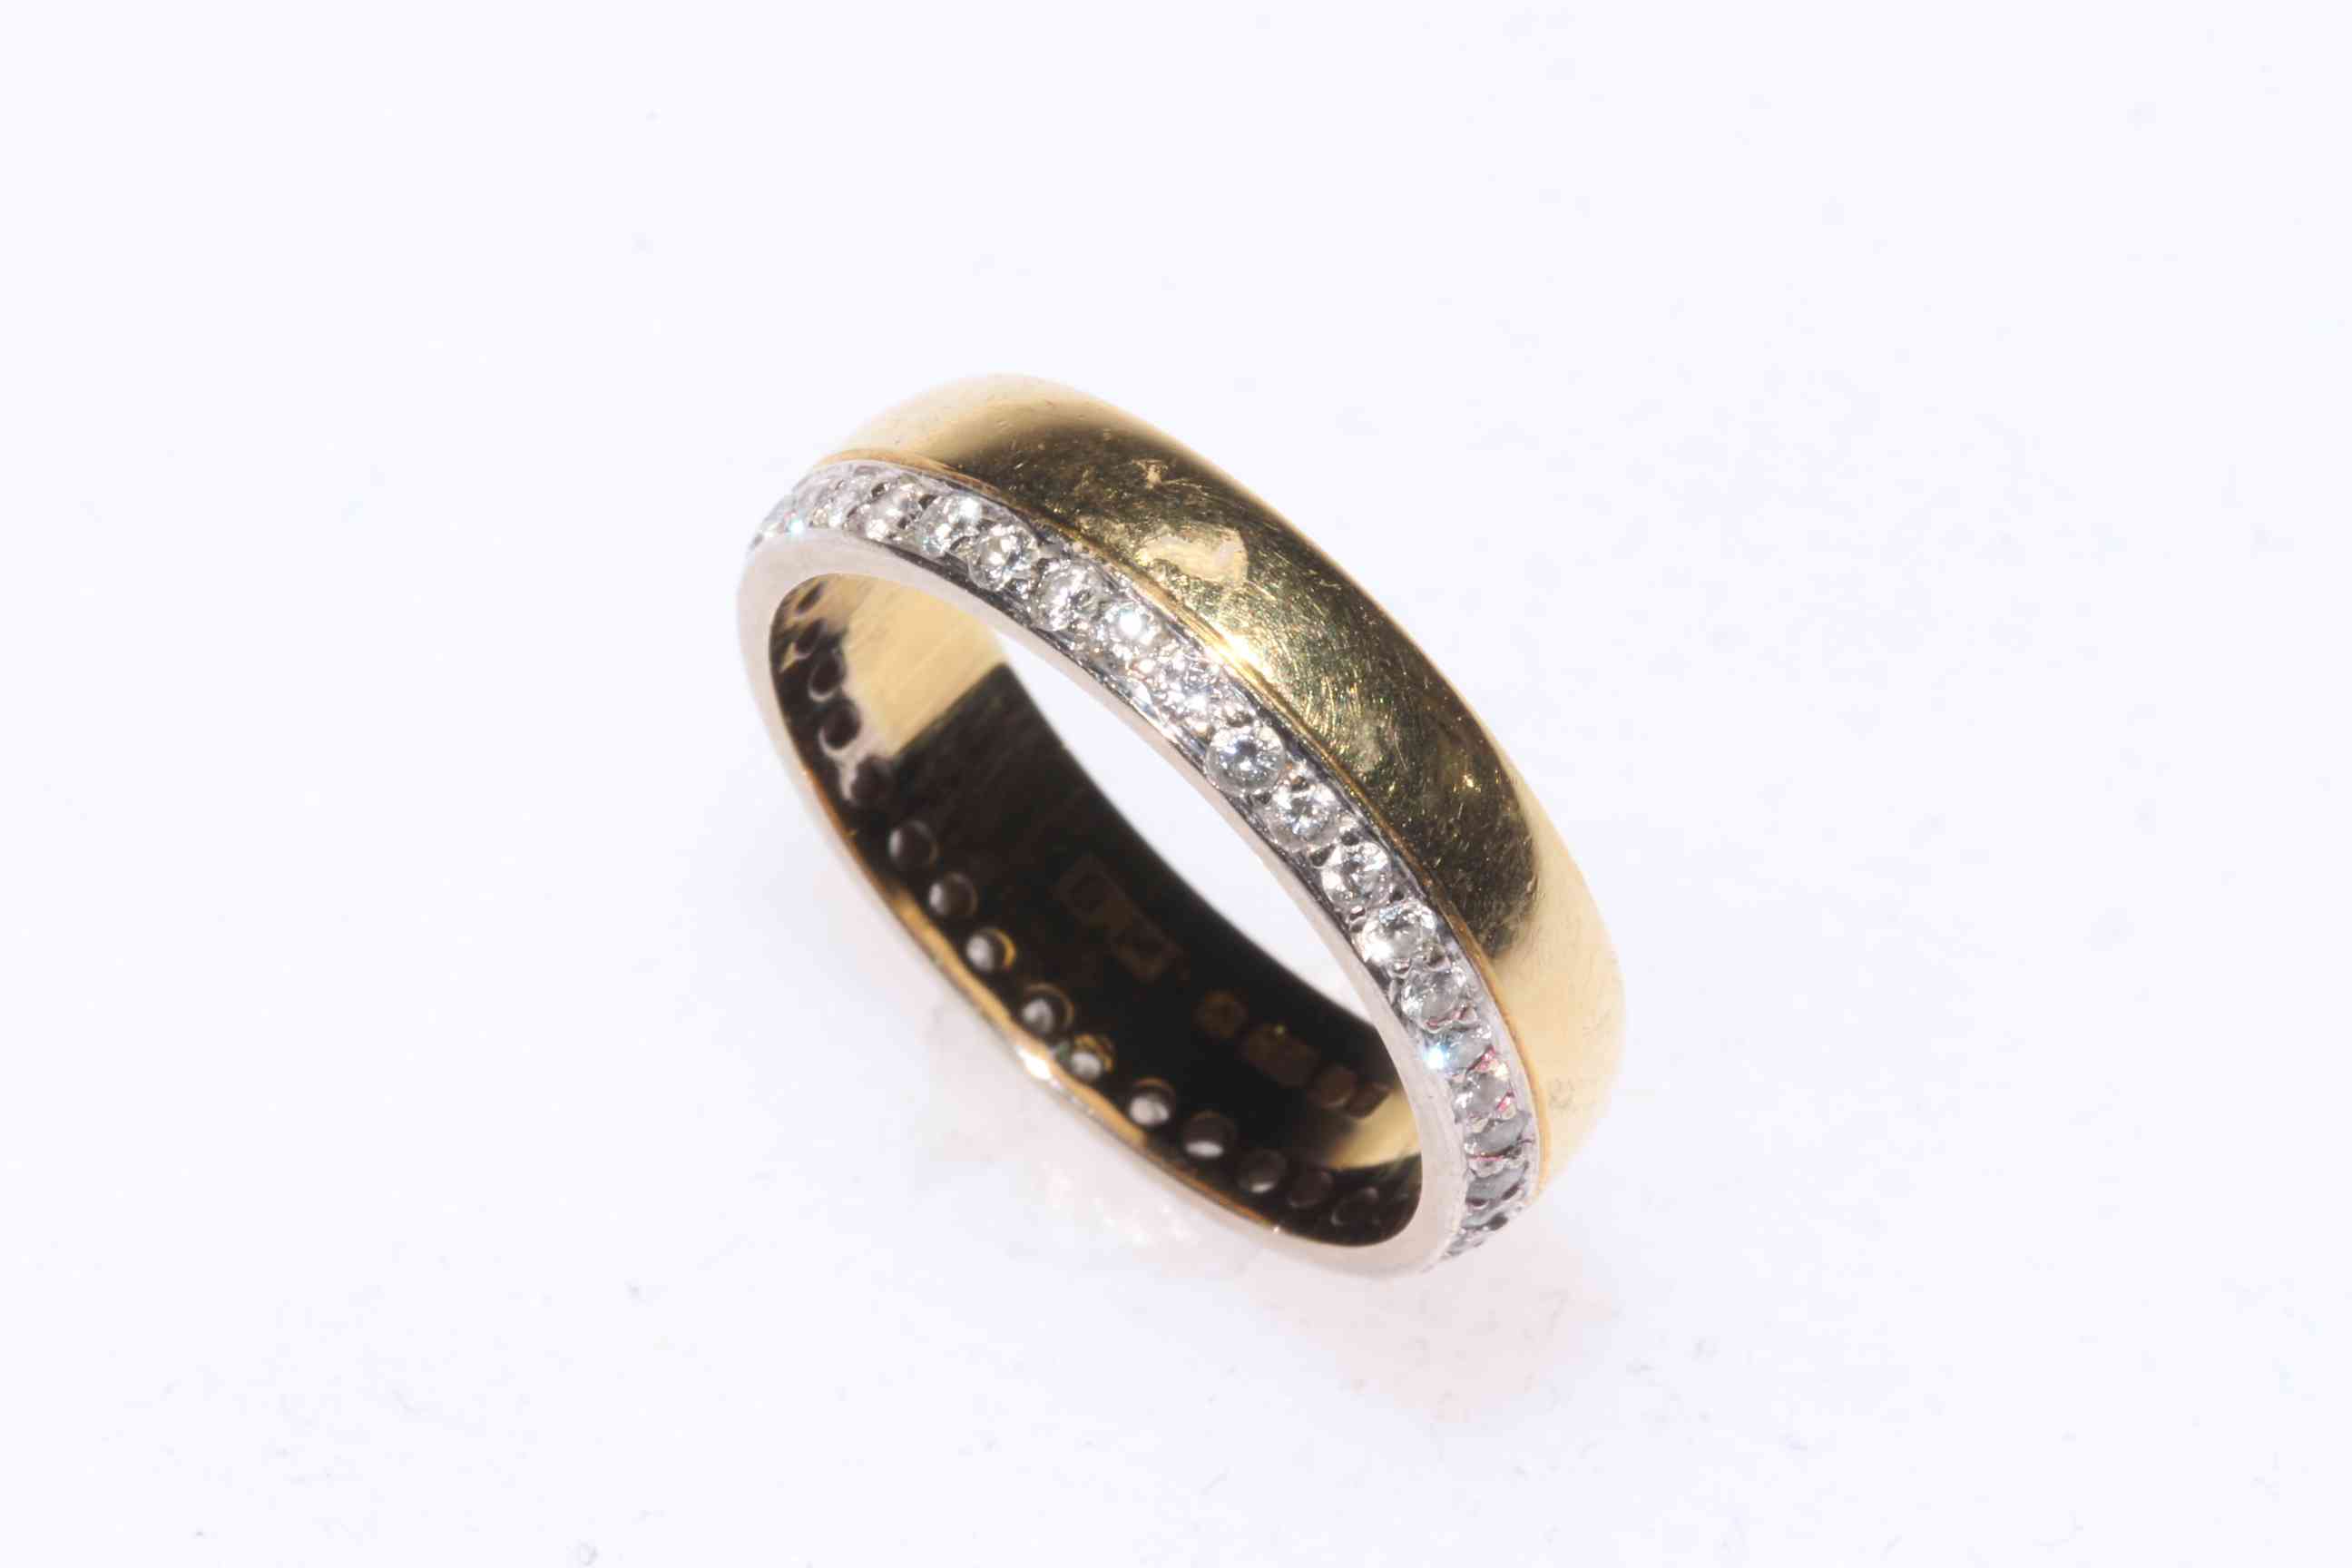 18 carat gold band ring with eternity row of diamonds, size L.